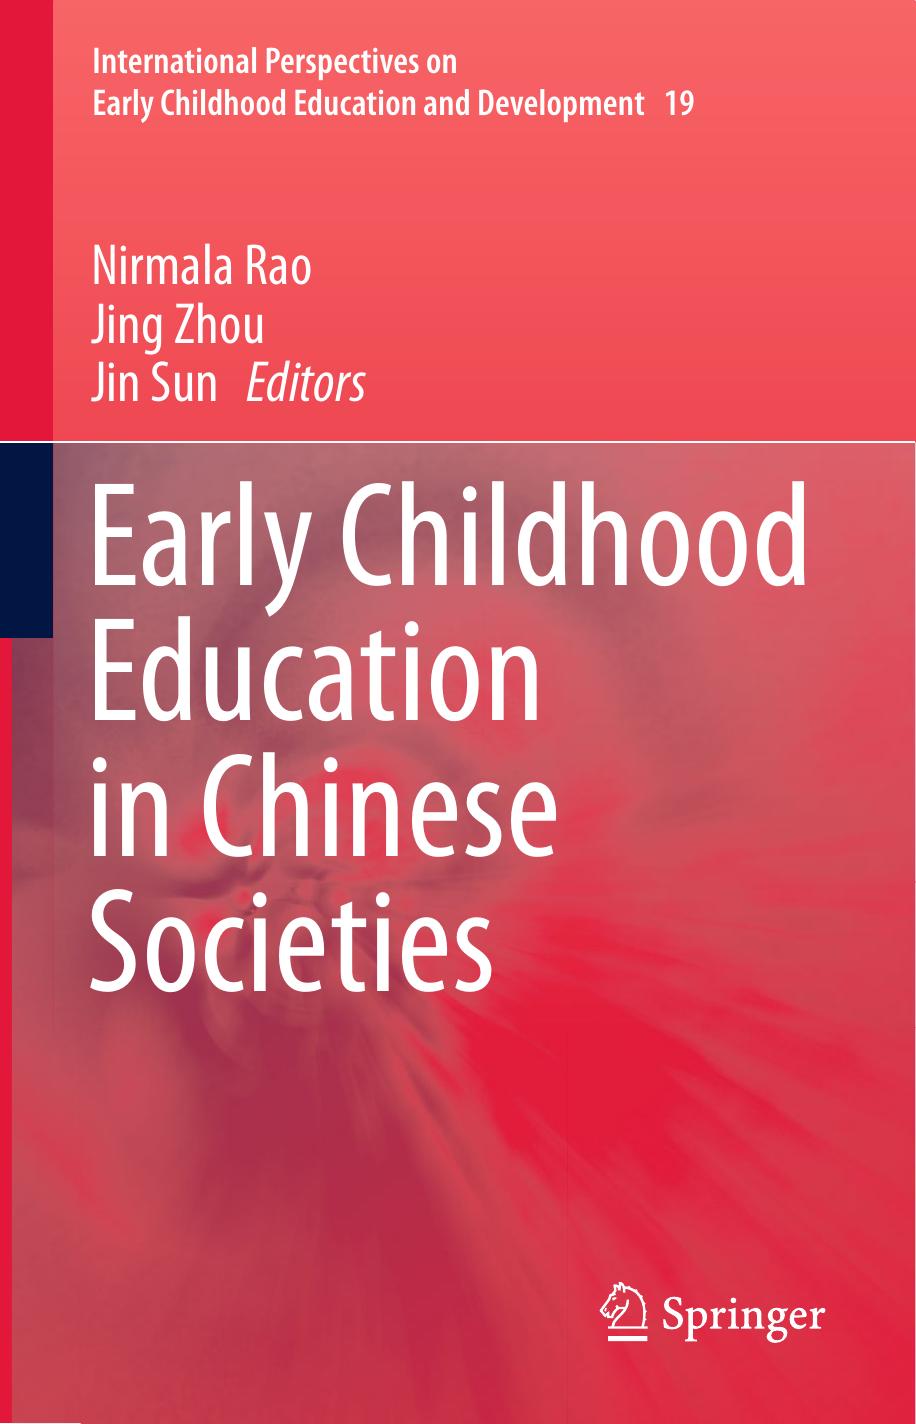 Early Childhood Education in Chinese Societies 2017